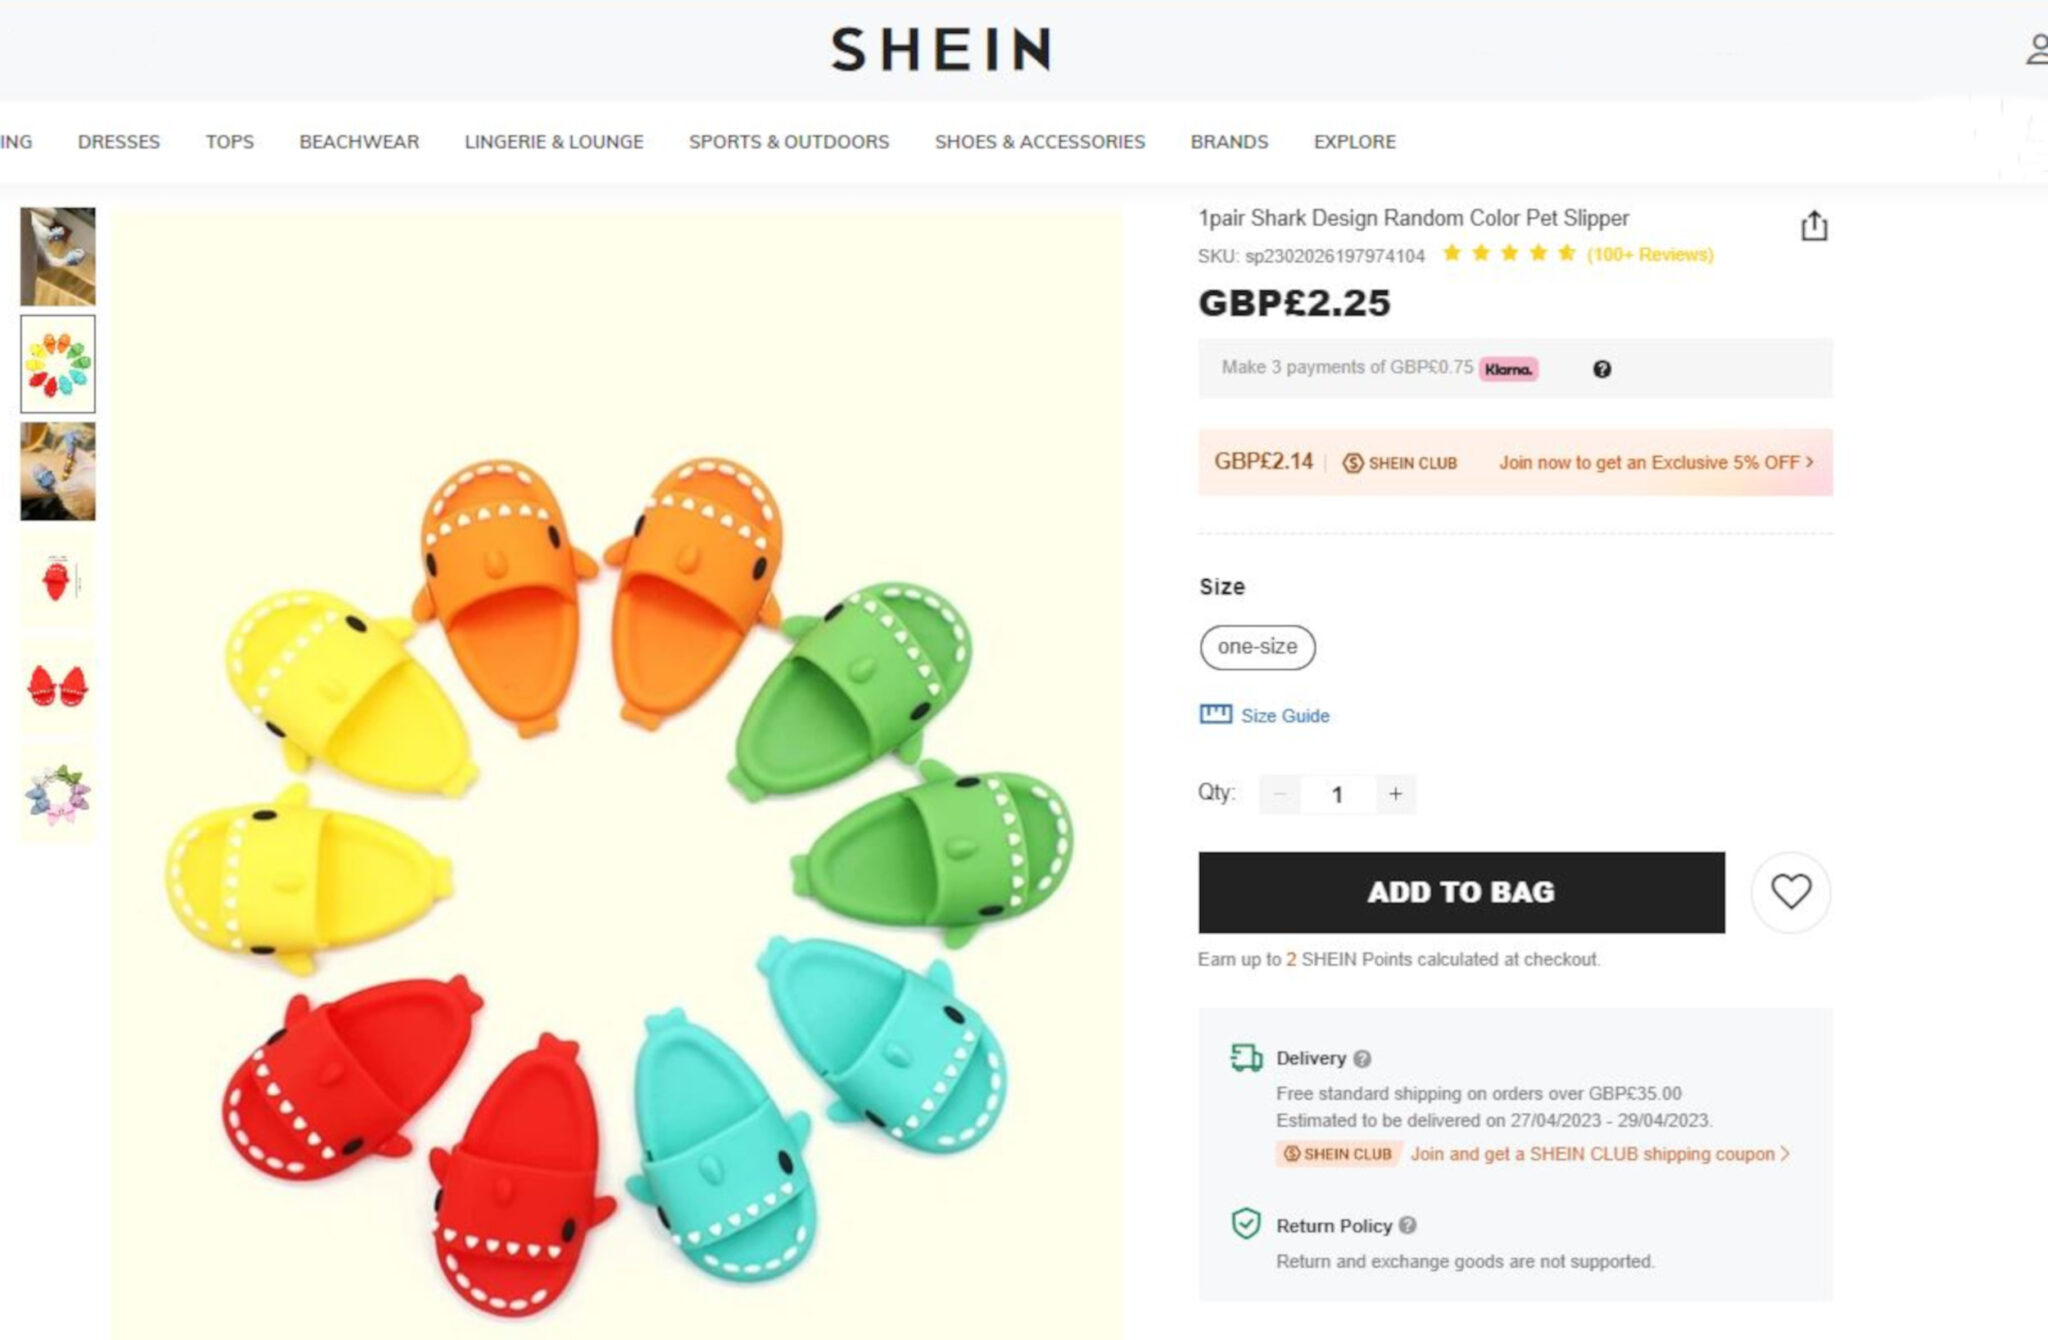 Social media users in stitches by Shein slippers for hamsters